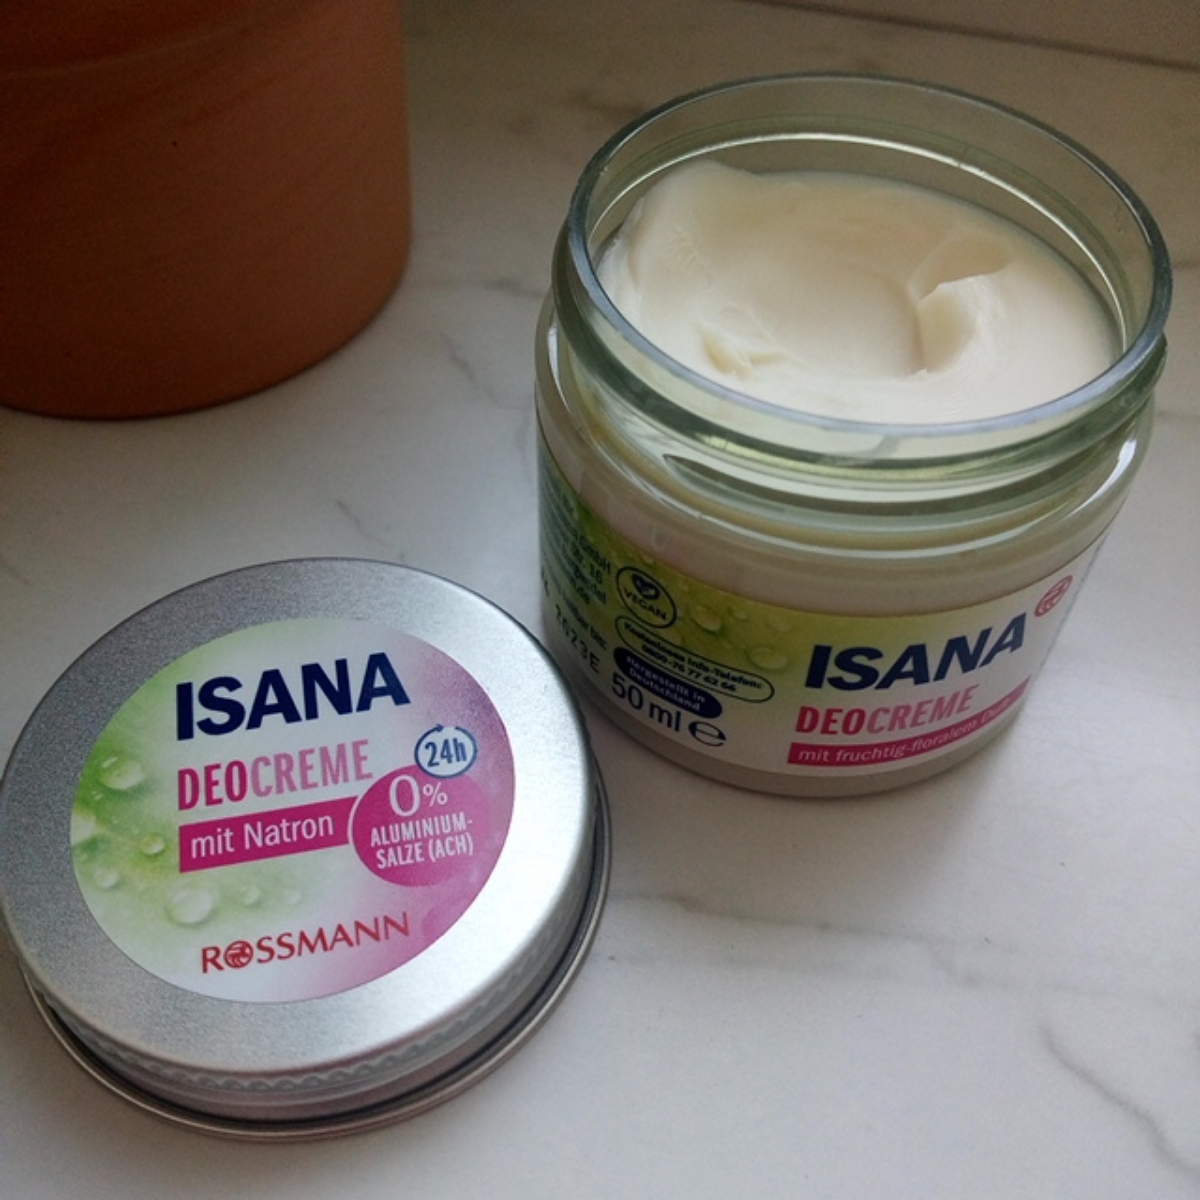 Isana Deo Creme Review | abillion